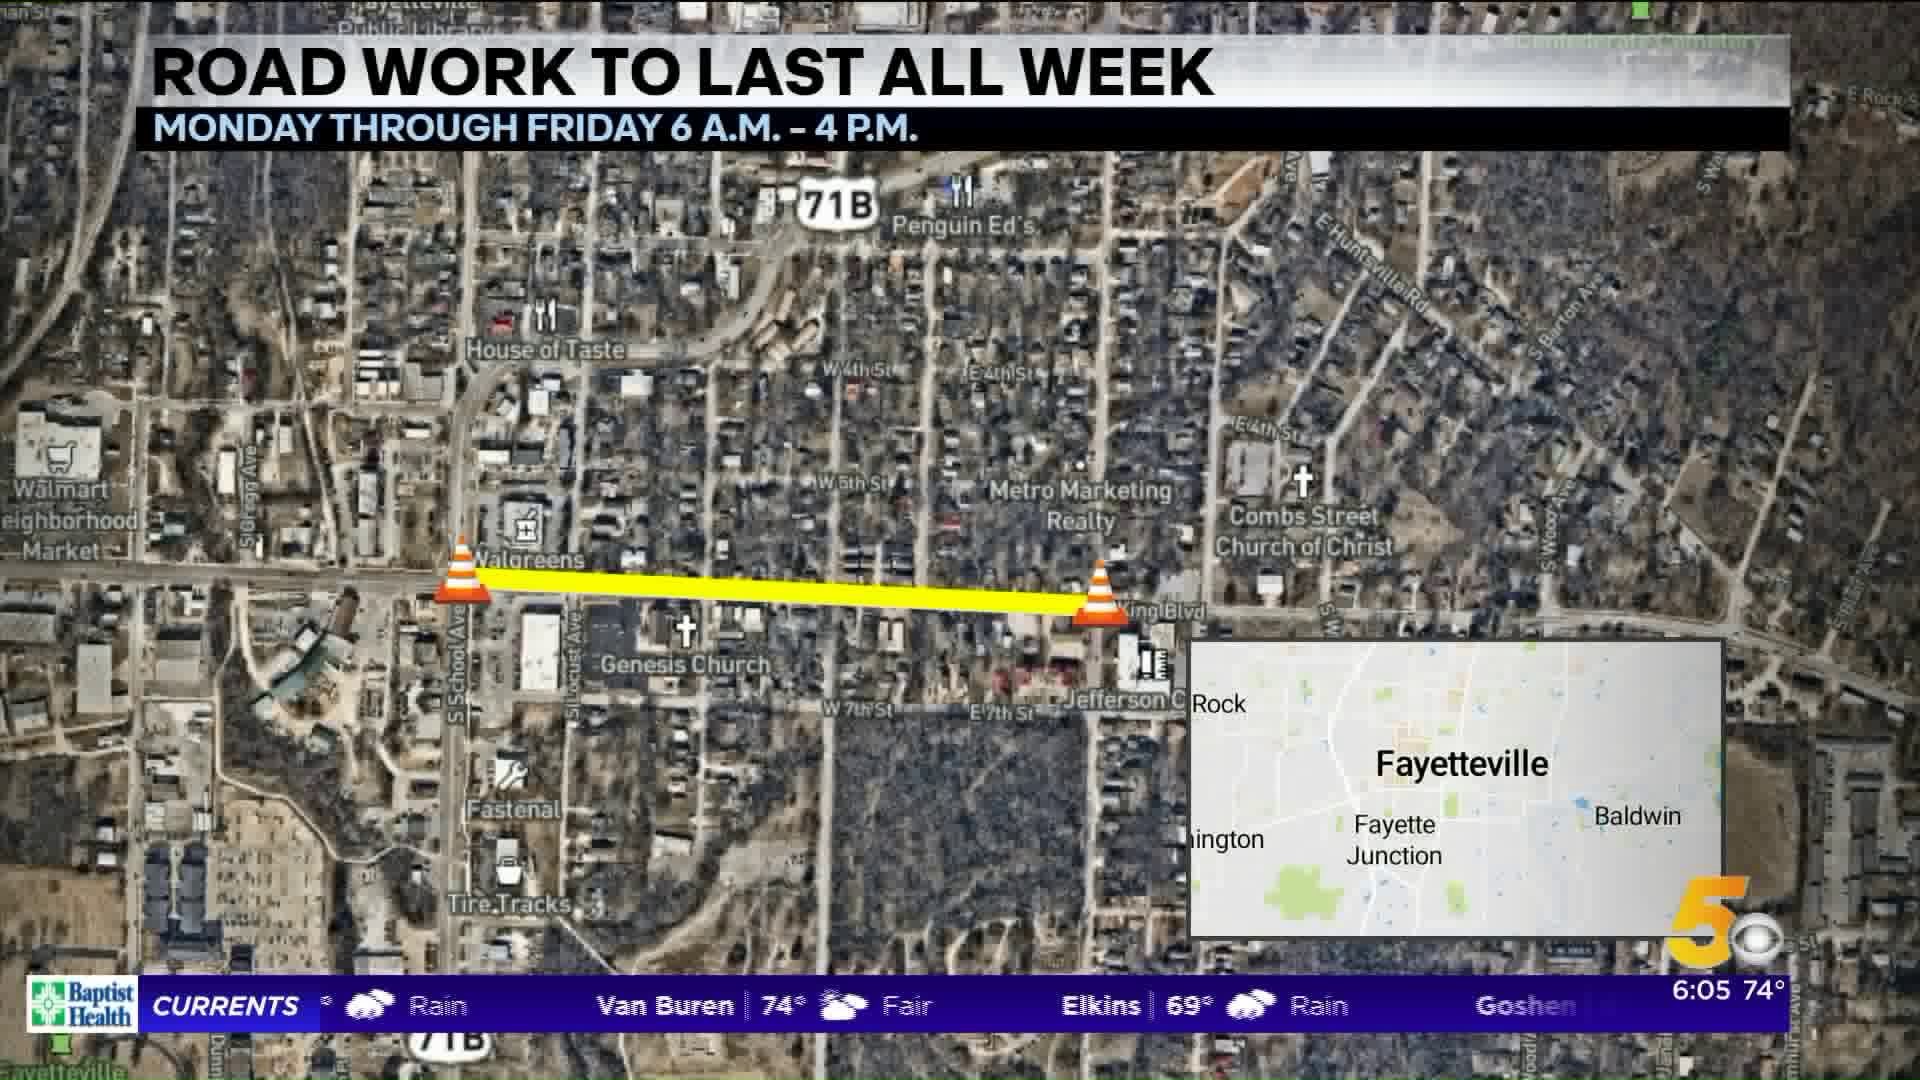 Road Closures In Fayetteville